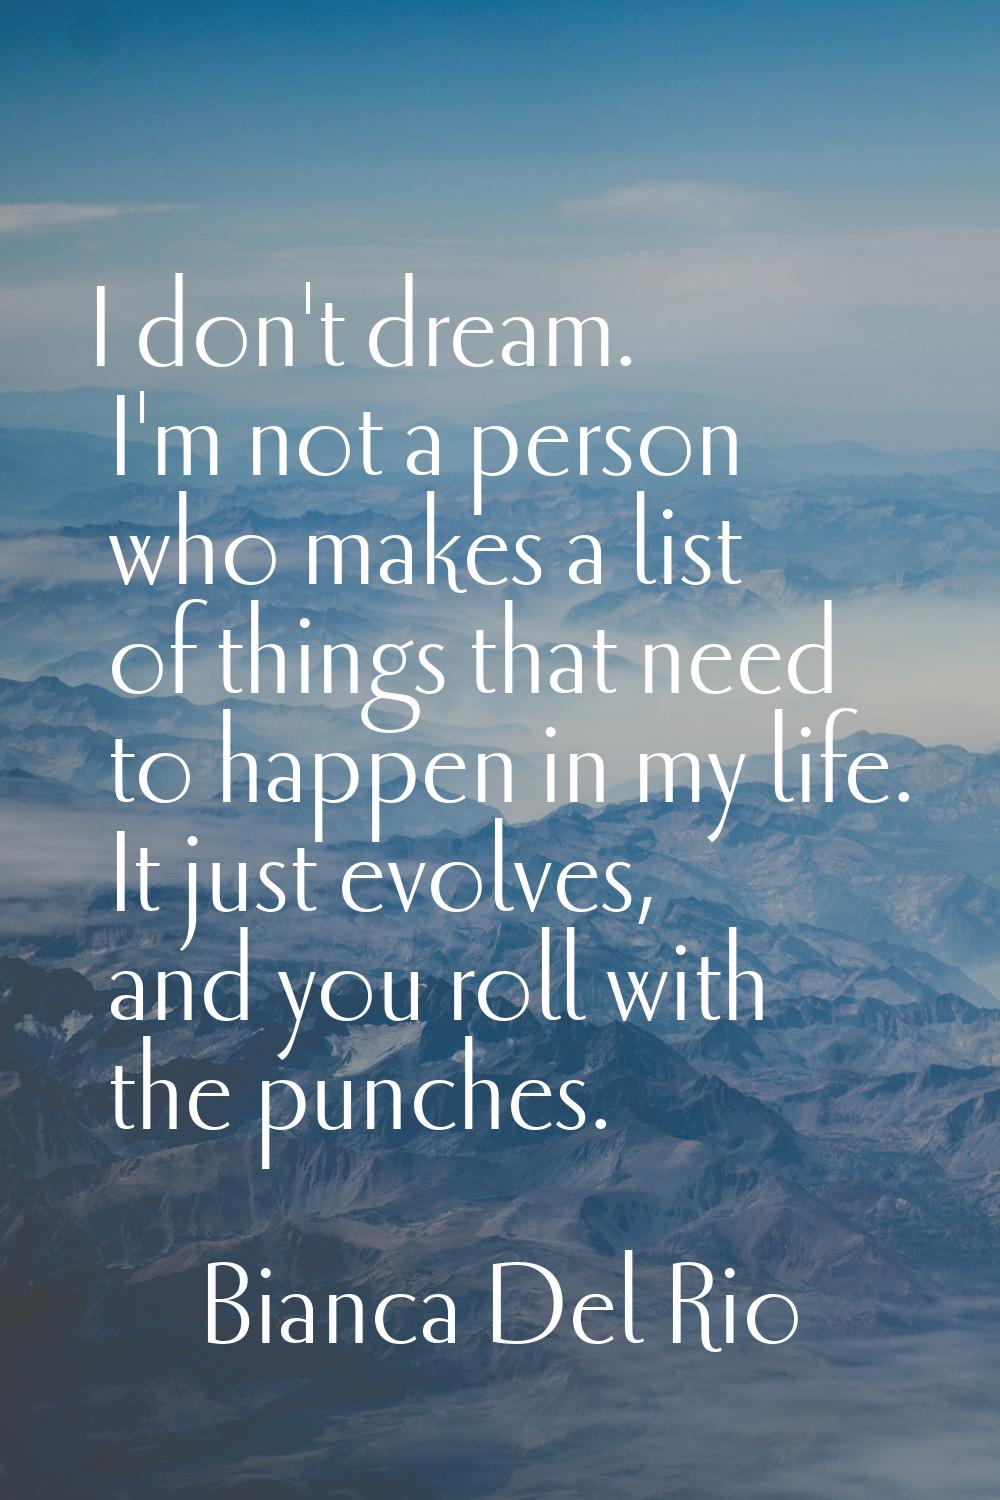 I don't dream. I'm not a person who makes a list of things that need to happen in my life. It just 